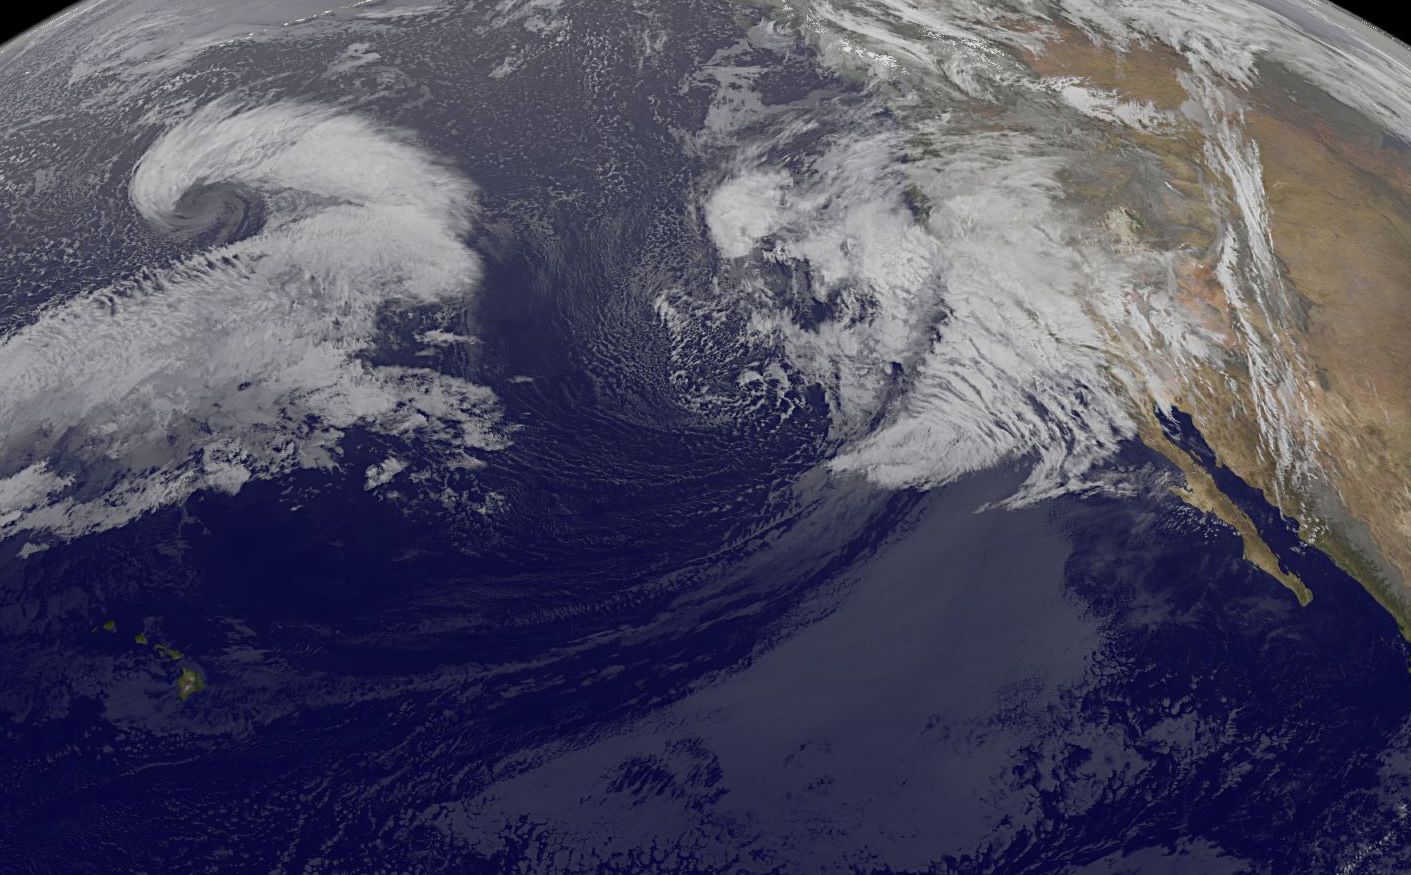 GOES-West image showing large storm system in E Pacific